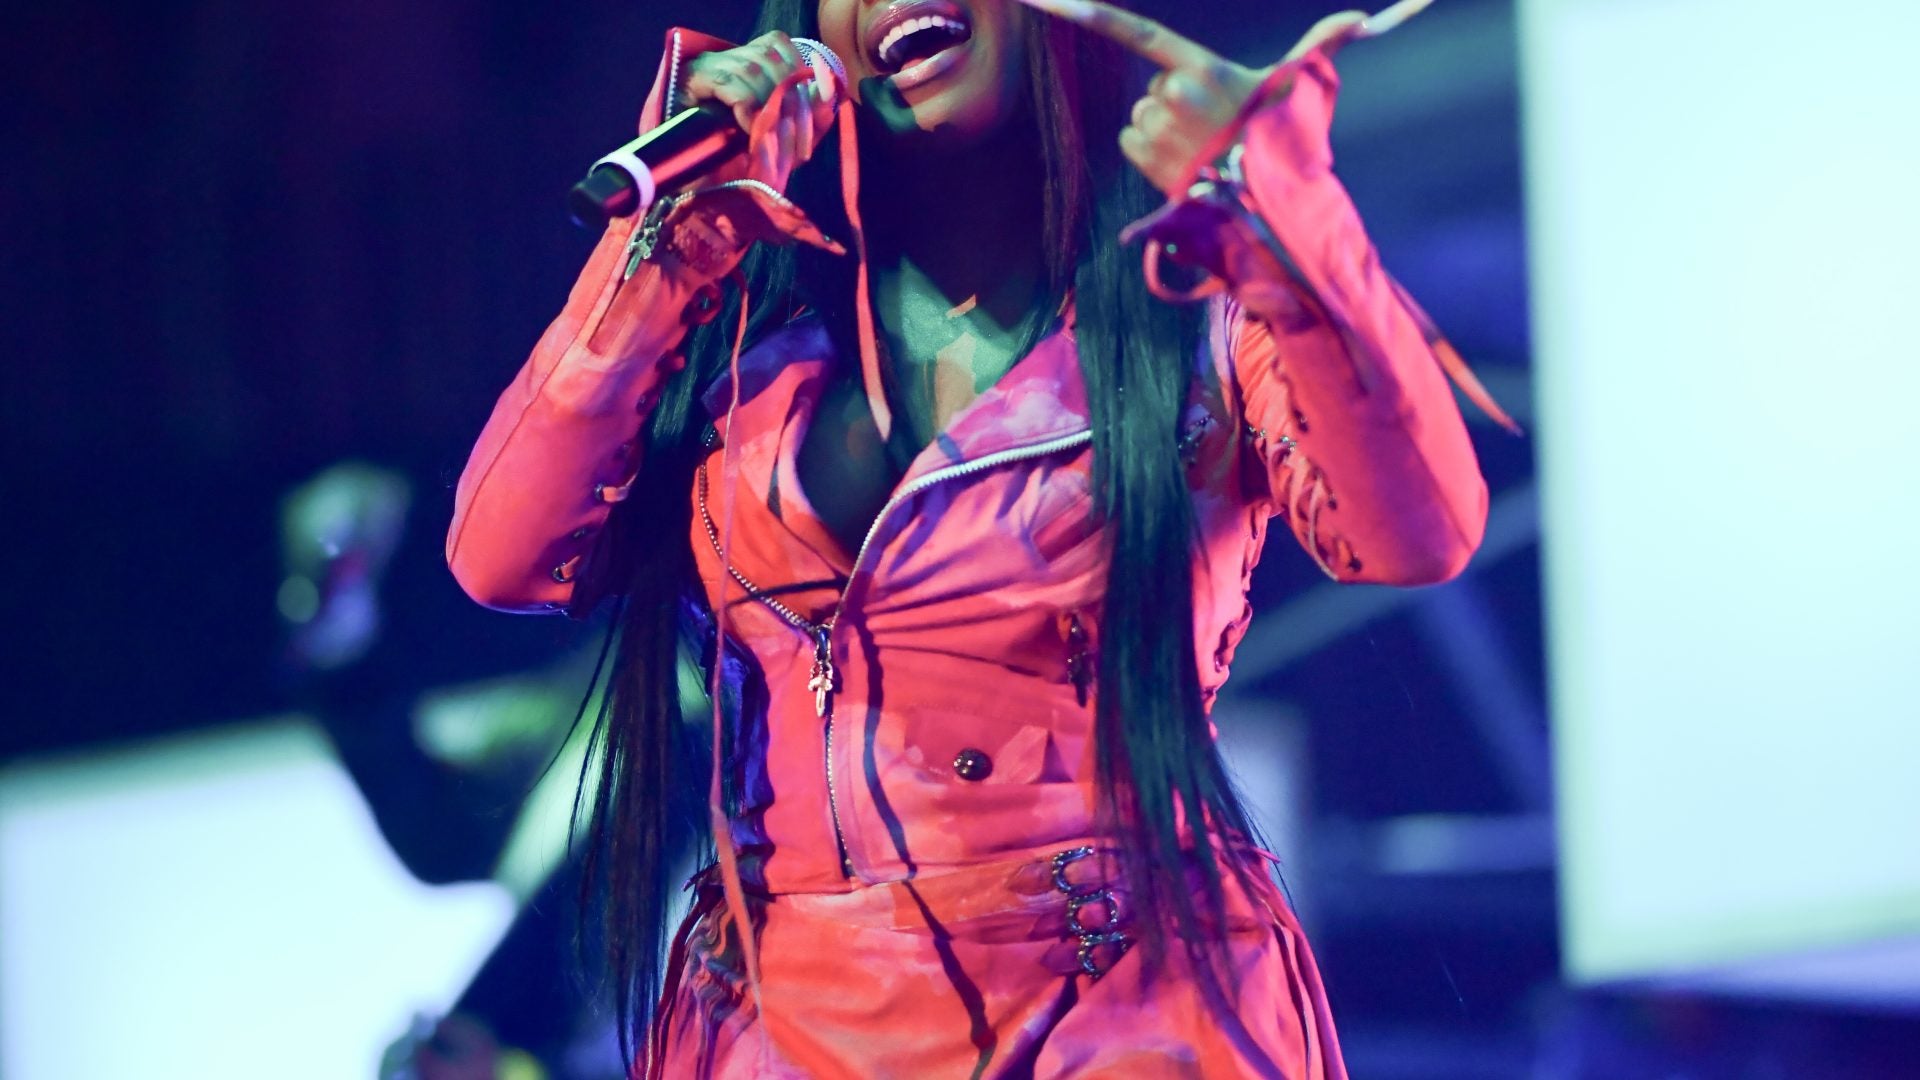 City Girls Rapper JT Launches Initiative For Formerly Incarcerated Women To Rehabilitate Into Society